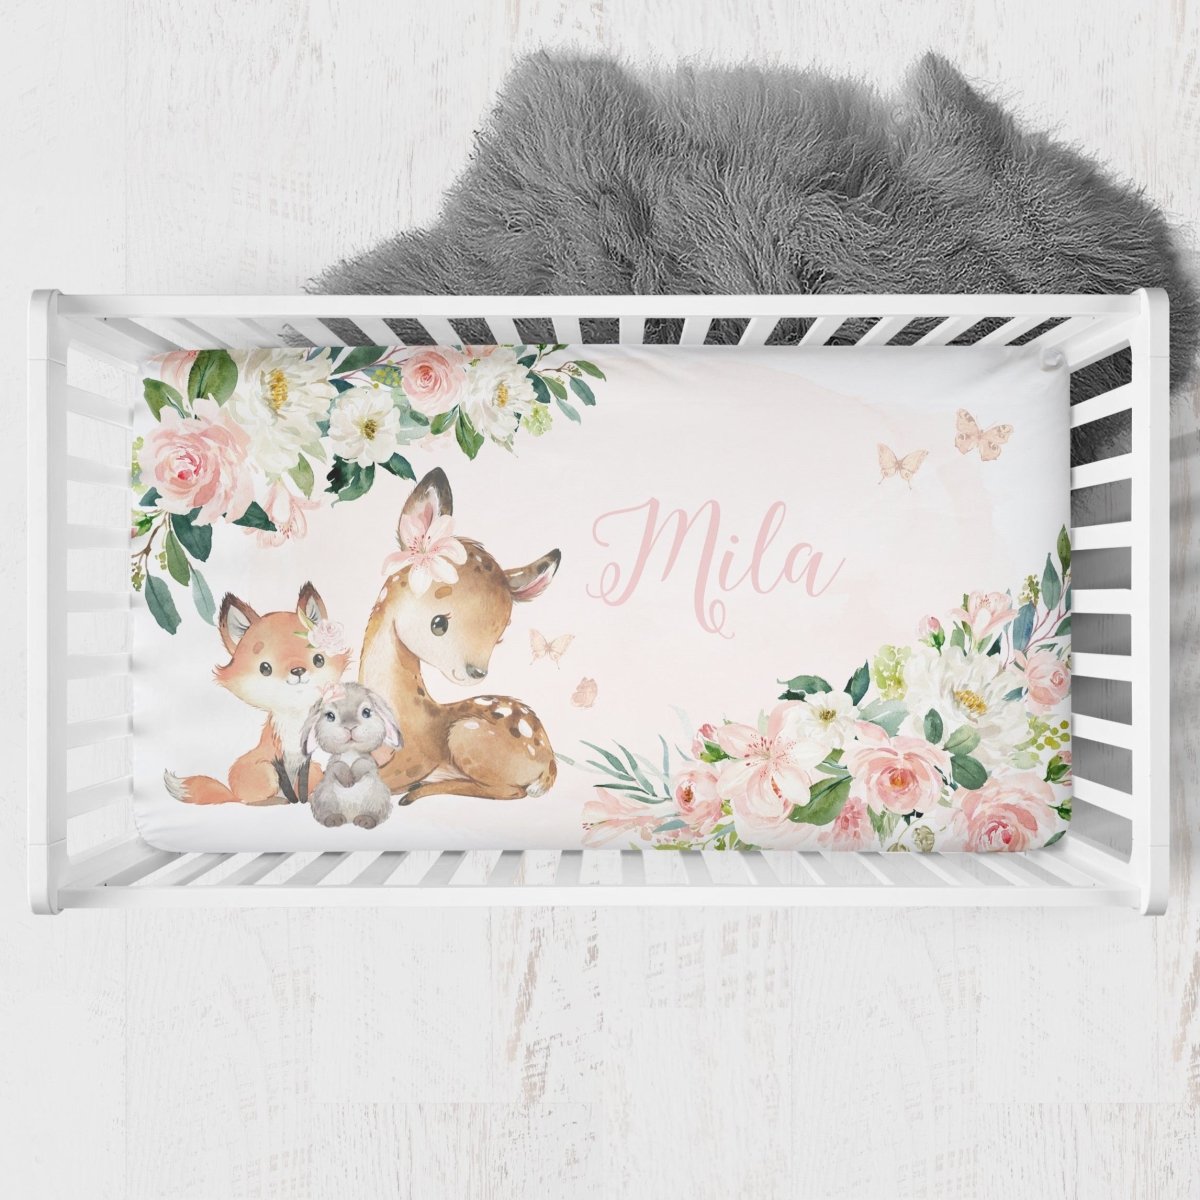 Woodland Meadows Personalized Crib Sheet - gender_girl, Personalized_Yes, text